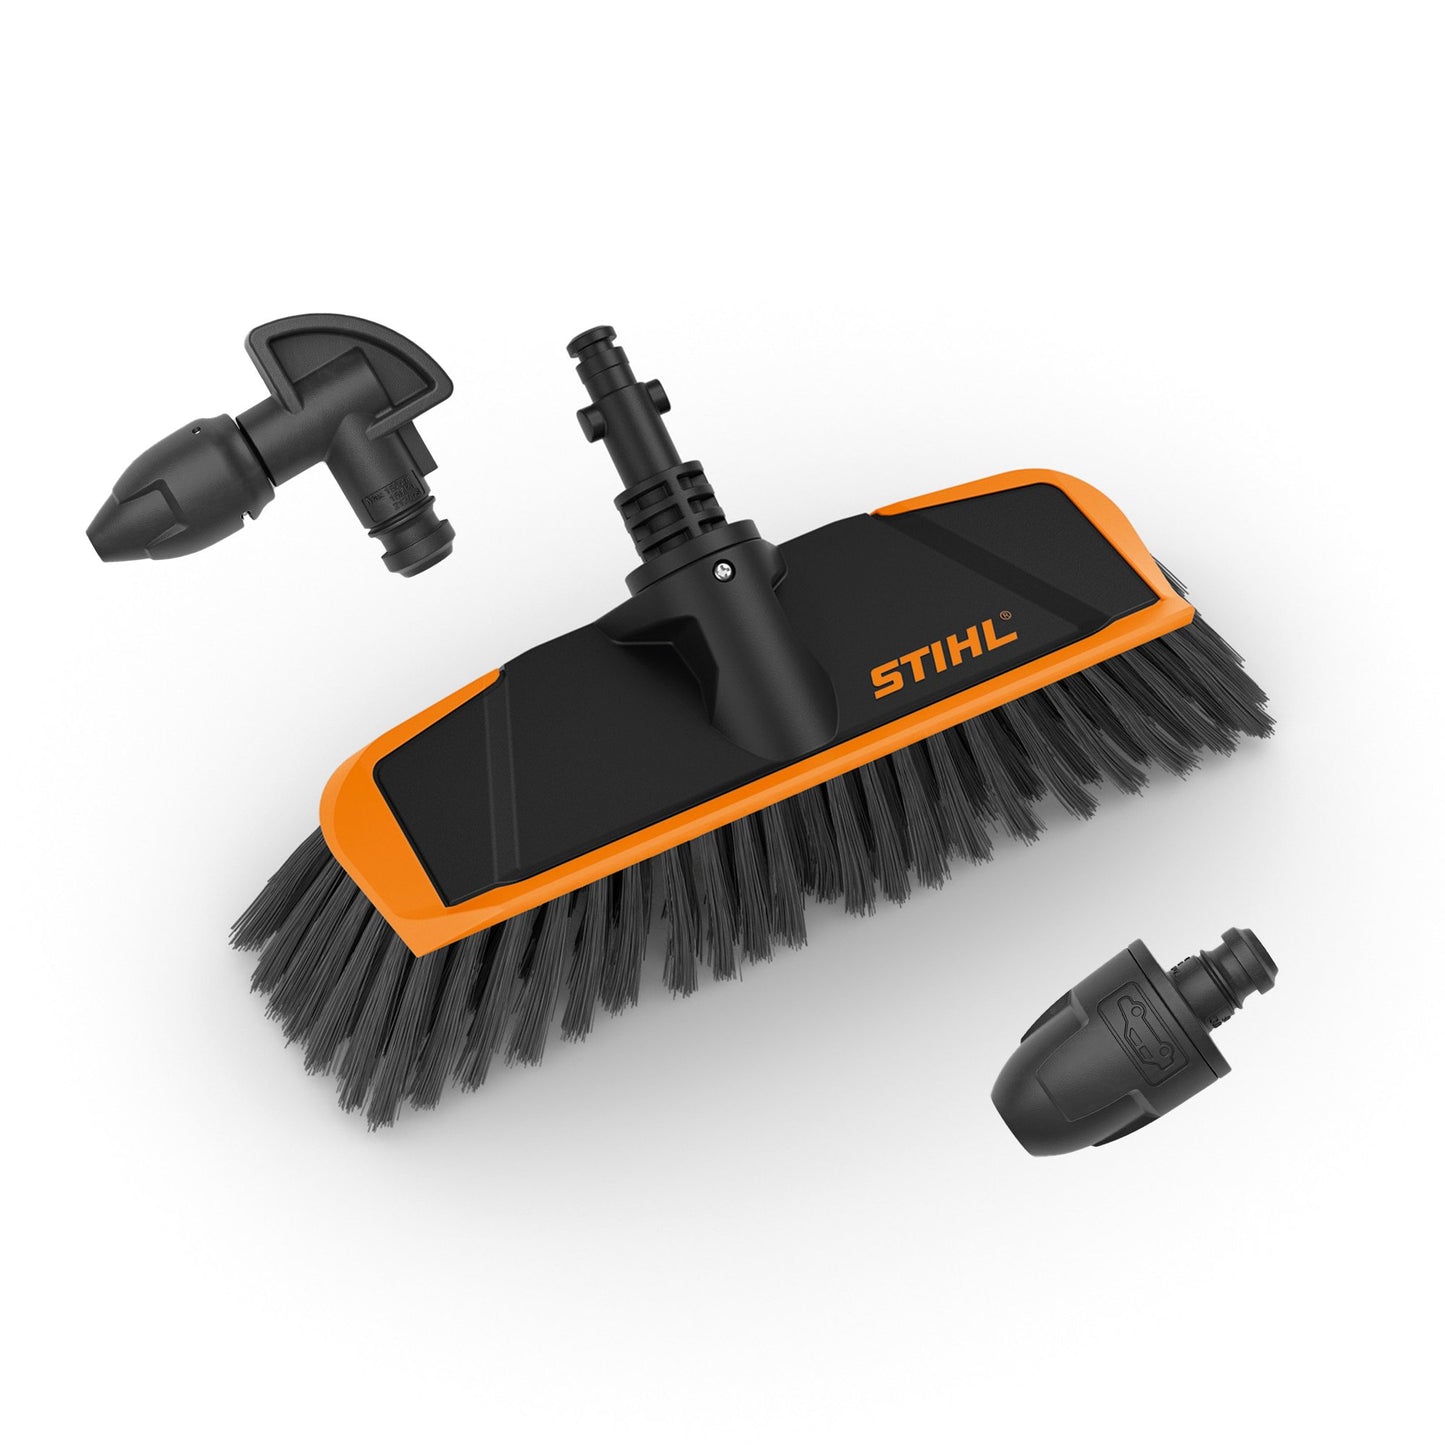 STIHL Cleaning Set for Pressure Washers RE 80 – RE 150 PLUS